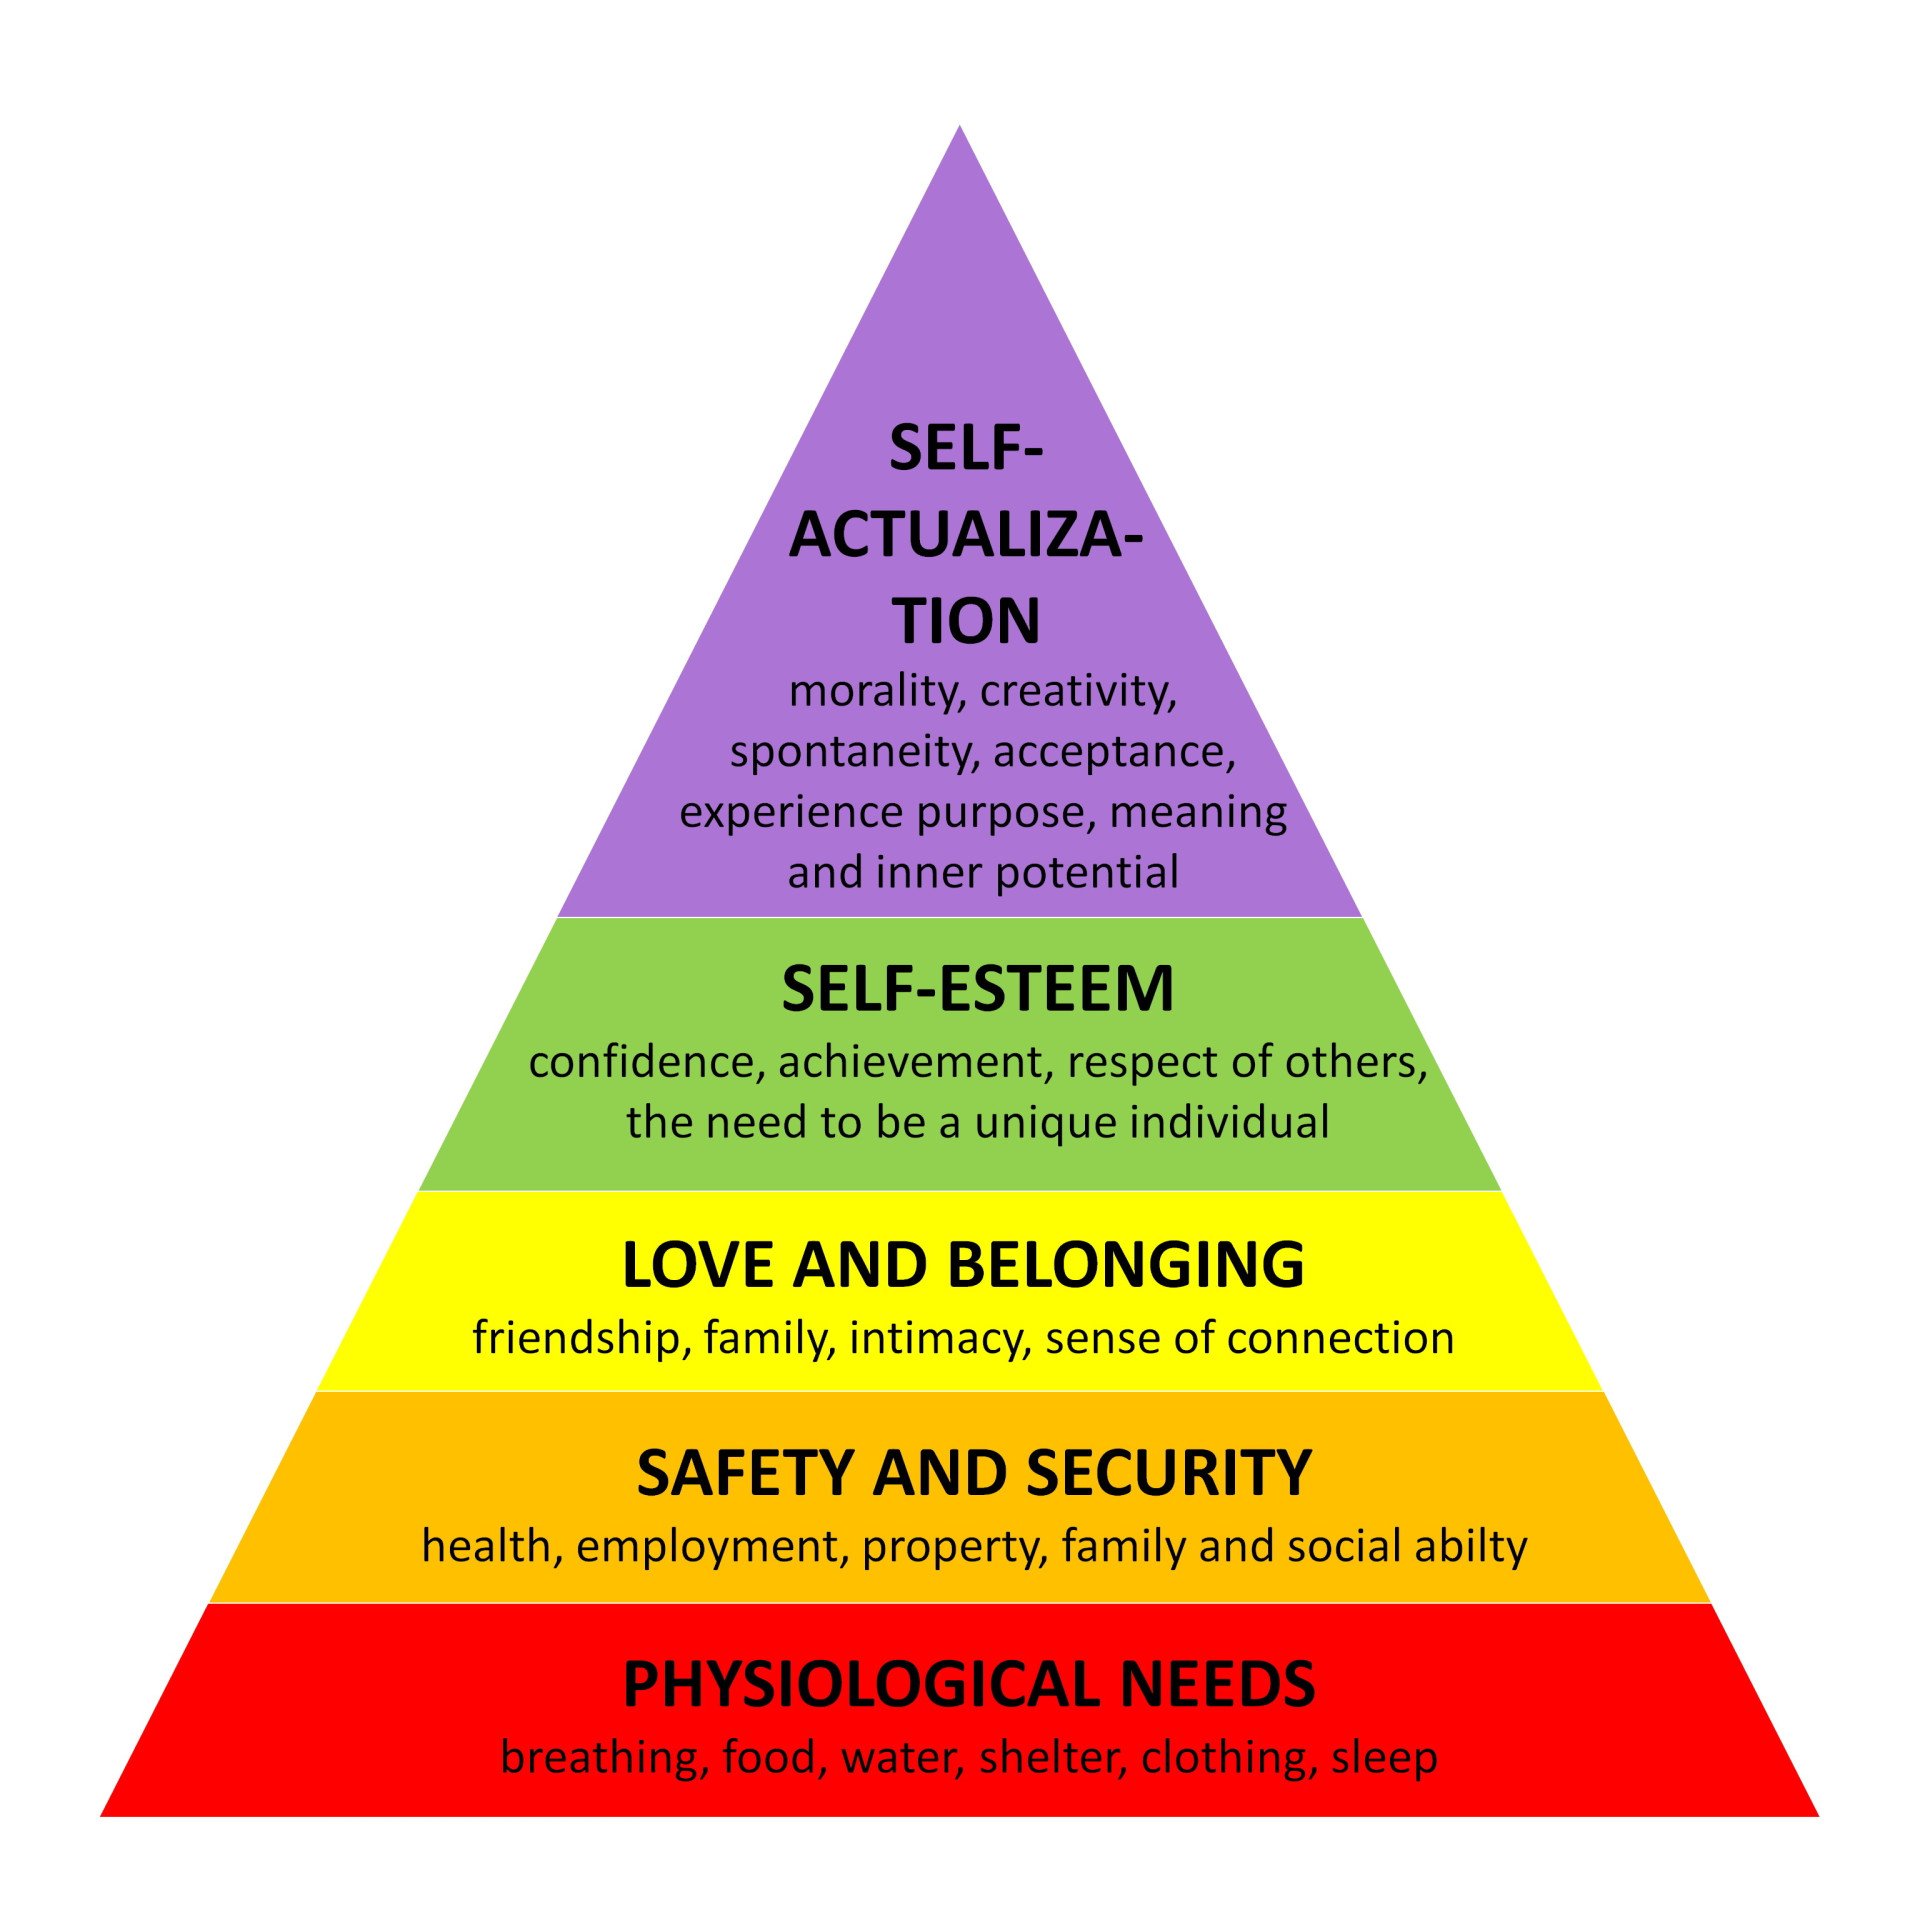 maslow-hierachy-of-needs-min.jpg